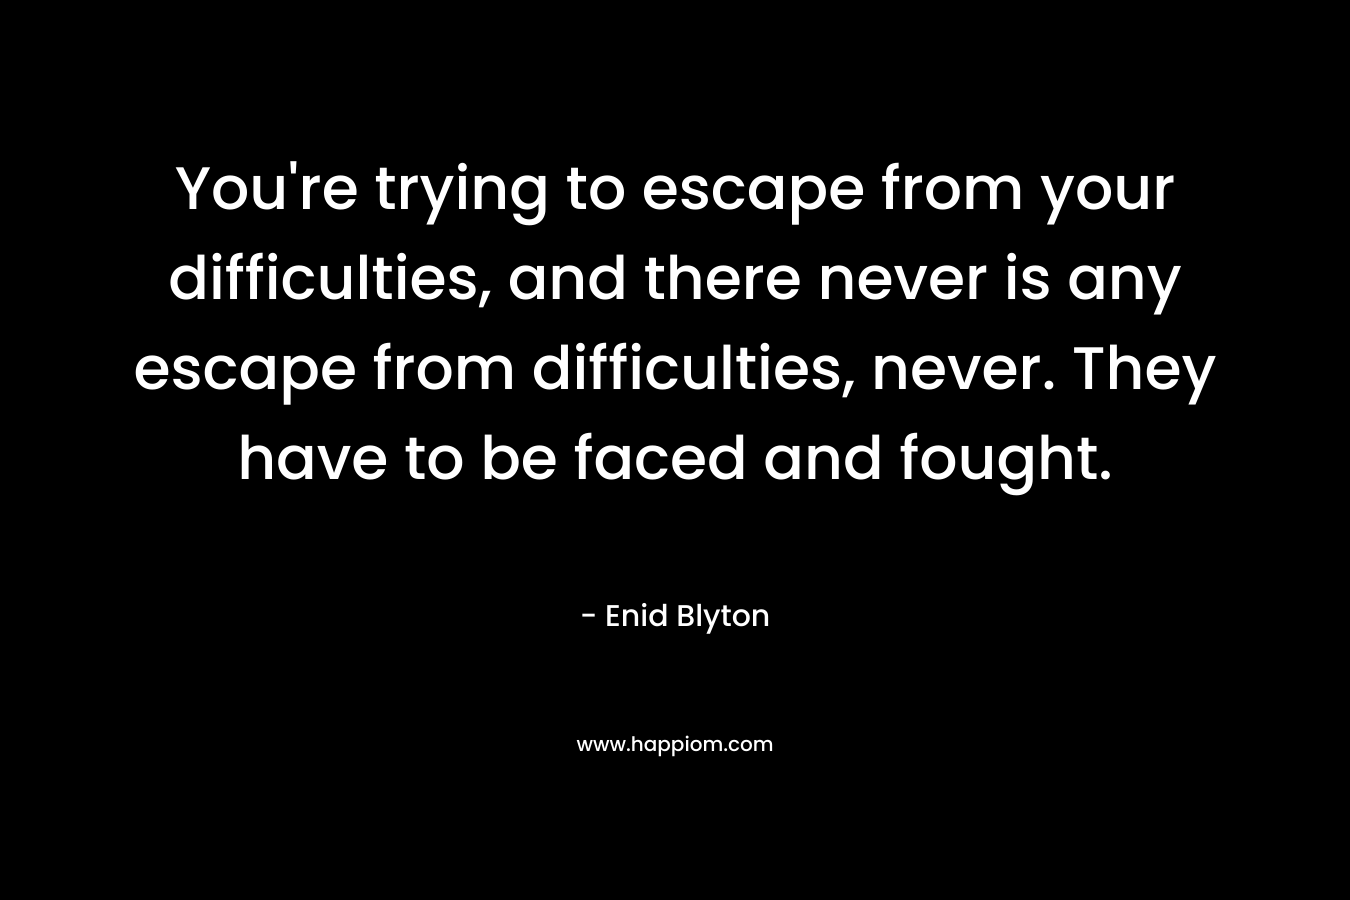 You’re trying to escape from your difficulties, and there never is any escape from difficulties, never. They have to be faced and fought. – Enid Blyton